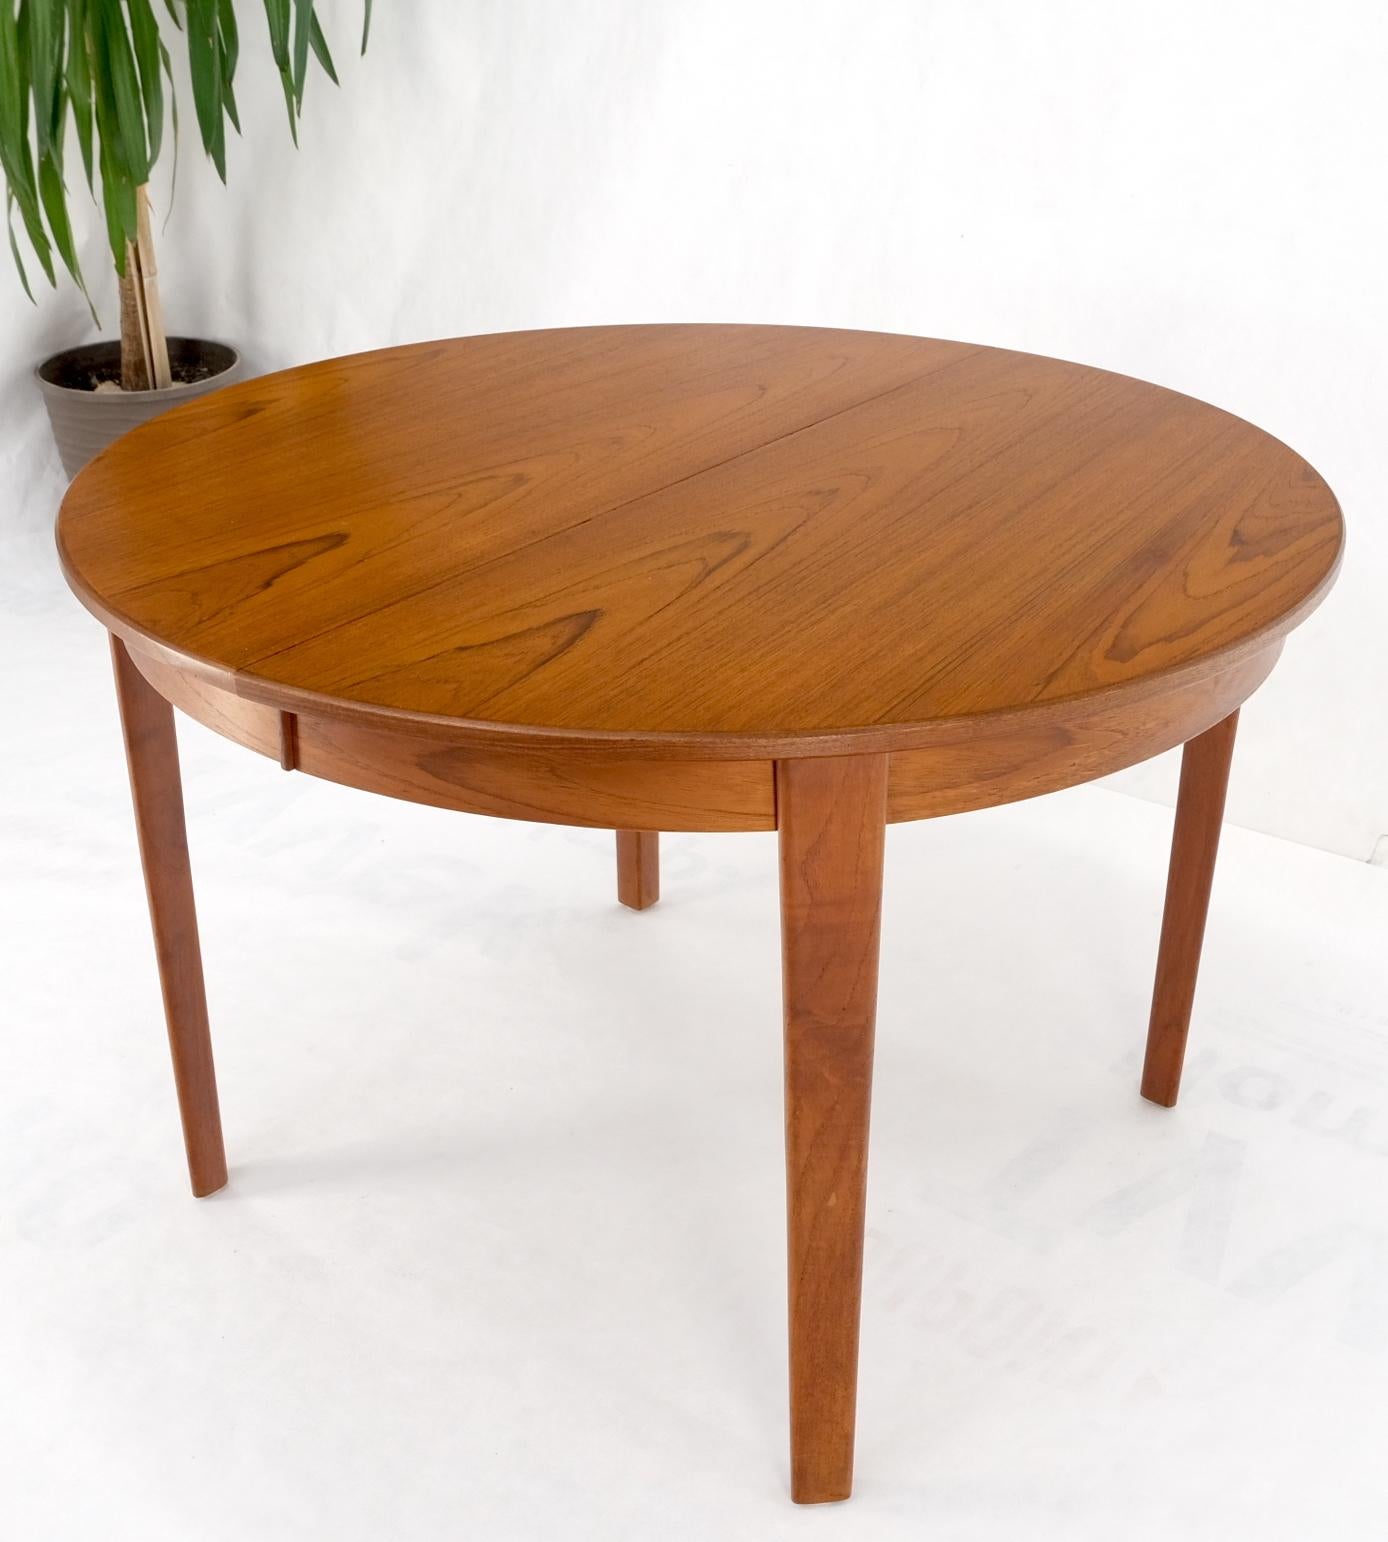 Danish Teak Mid Century Modern Round Dining Banquet Conference Table 4 Leaf MINT For Sale 8